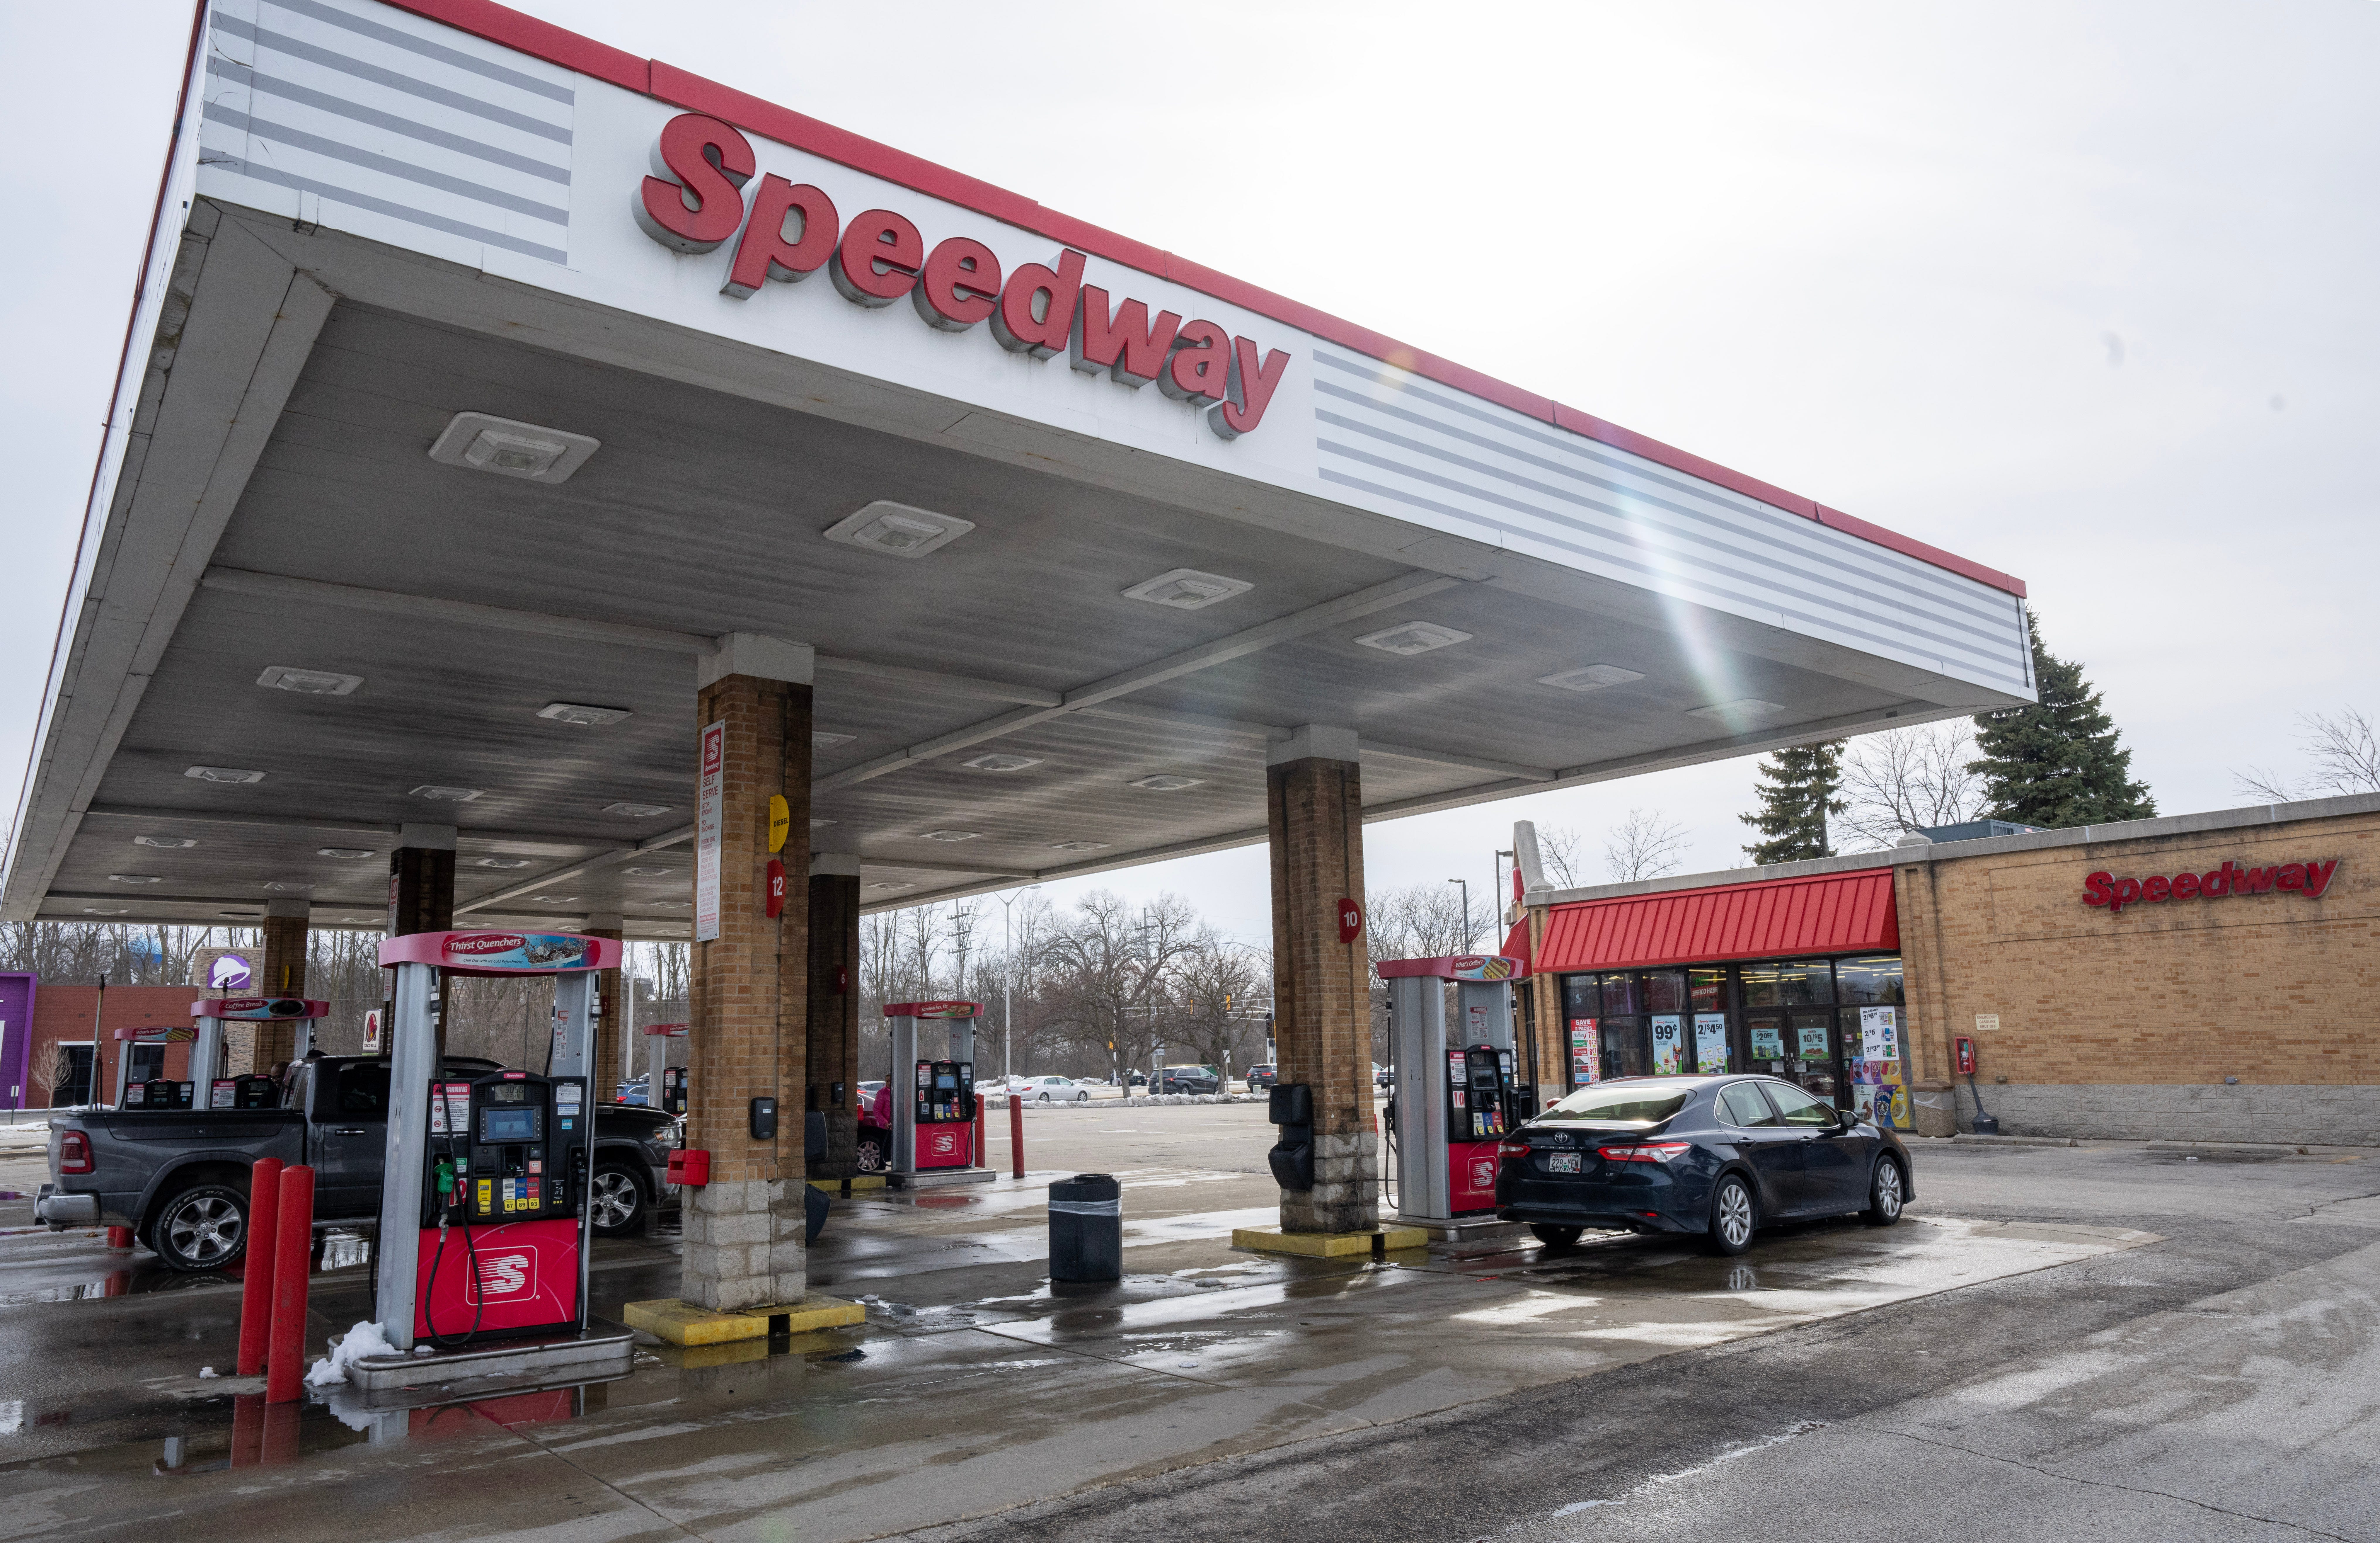 The Speedway gas station is shown at W178N9653 Riversbend Lane in Germantown, Wis. Bobbie Lou Schoeffling, 31, was found shot to death inside her home two weeks after telling a Milwaukee Police officer on July 15 that her ex-boyfriend beat her in a car in front of her children about 30 minutes earlier.